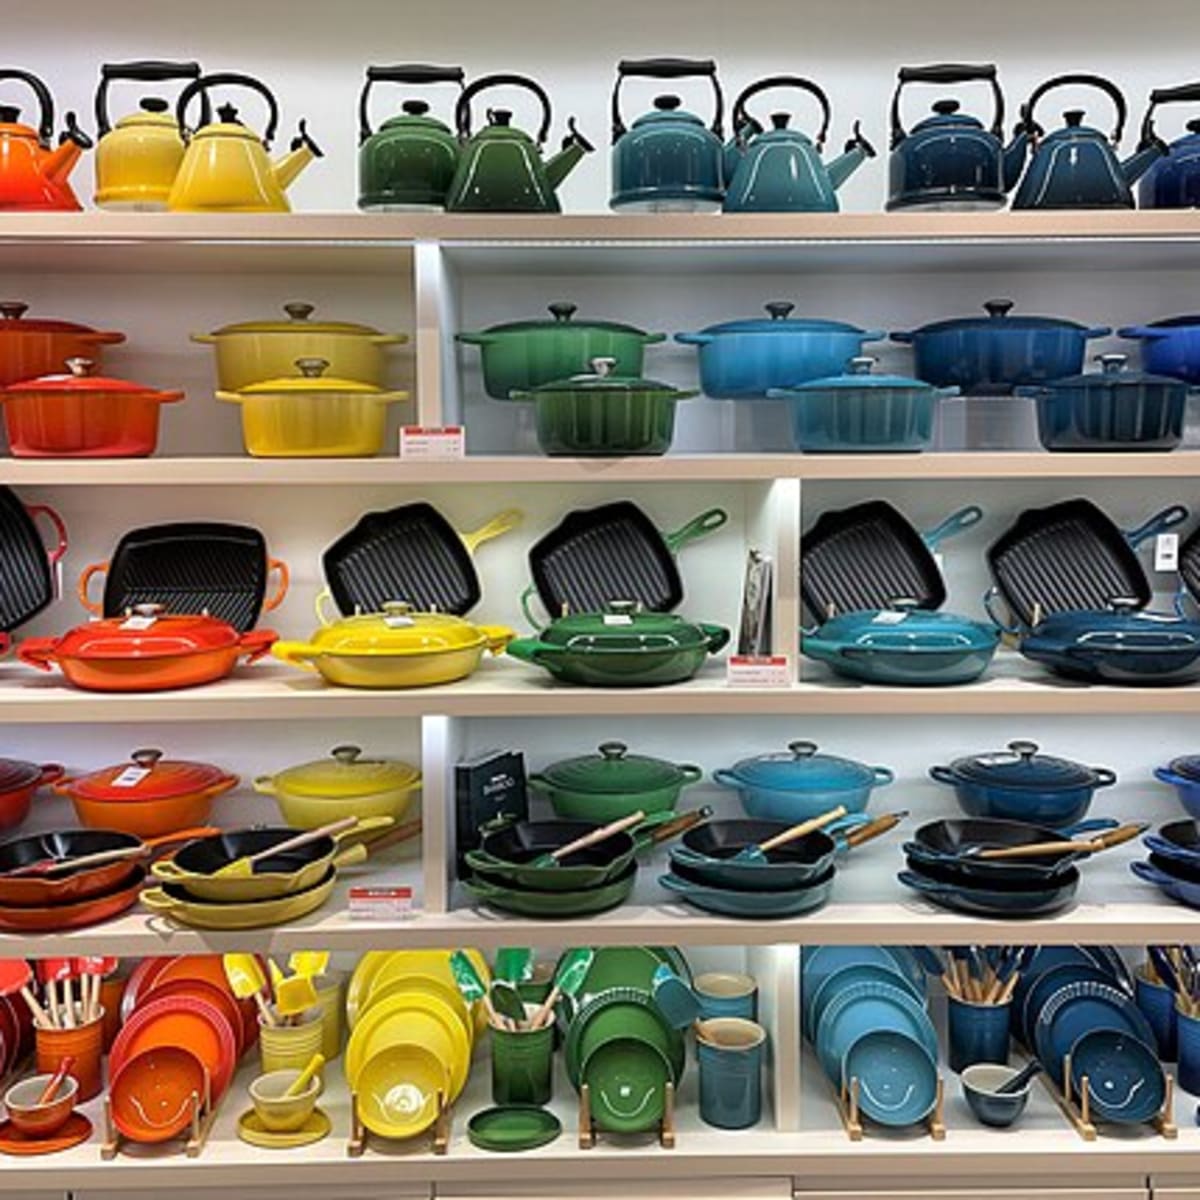 Le Creuset's massive factory sale is coming to Minneapolis - Bring